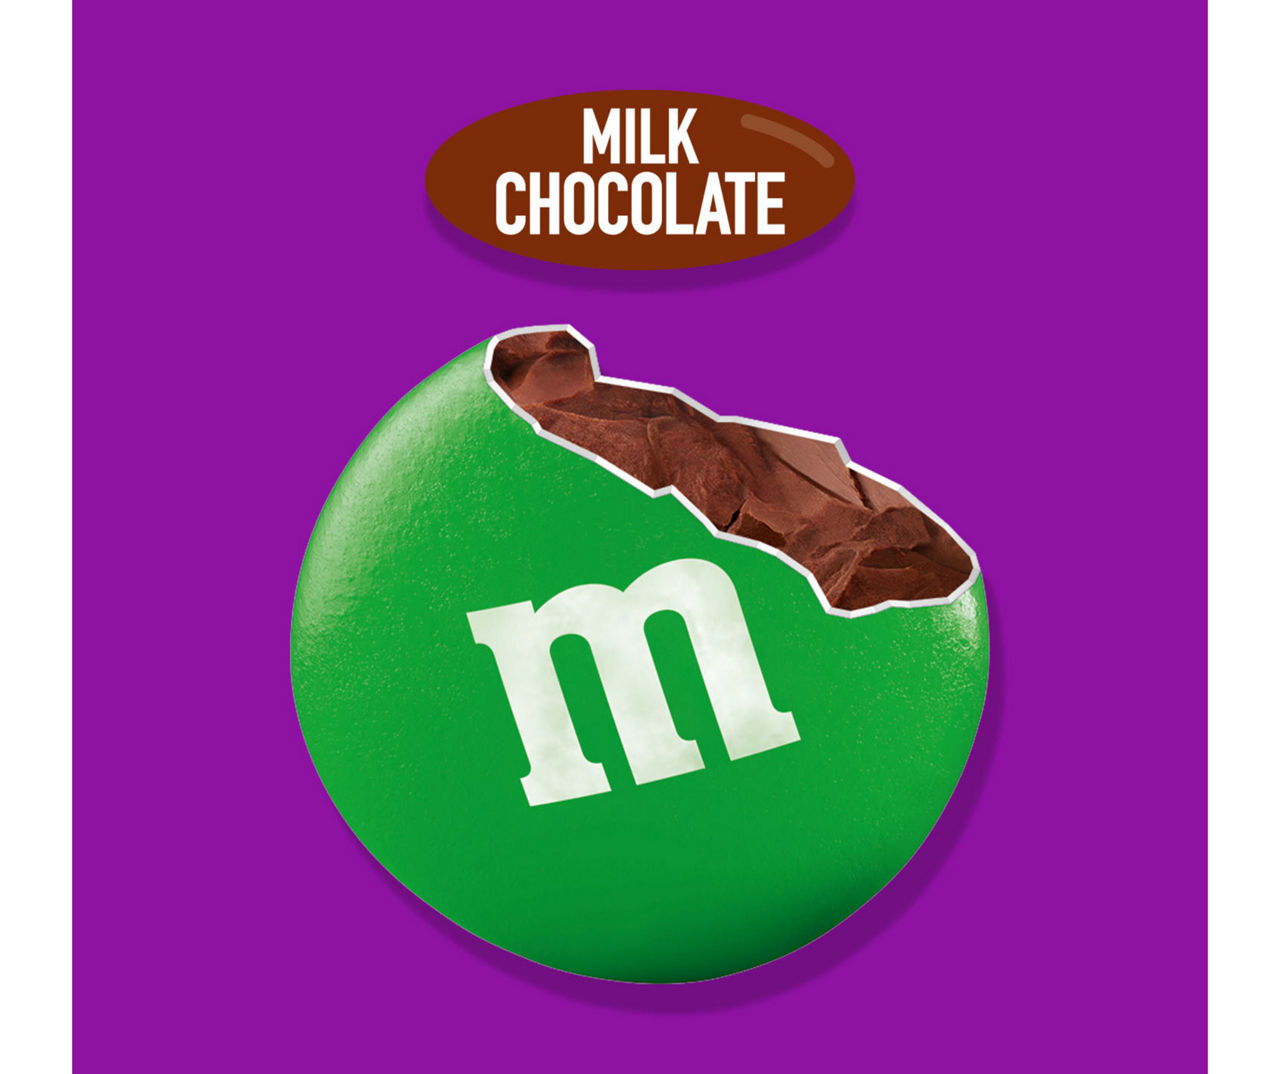 M&M's Purple, Green & Brown Peanut Butter Chocolate Candy, 1.63 Oz